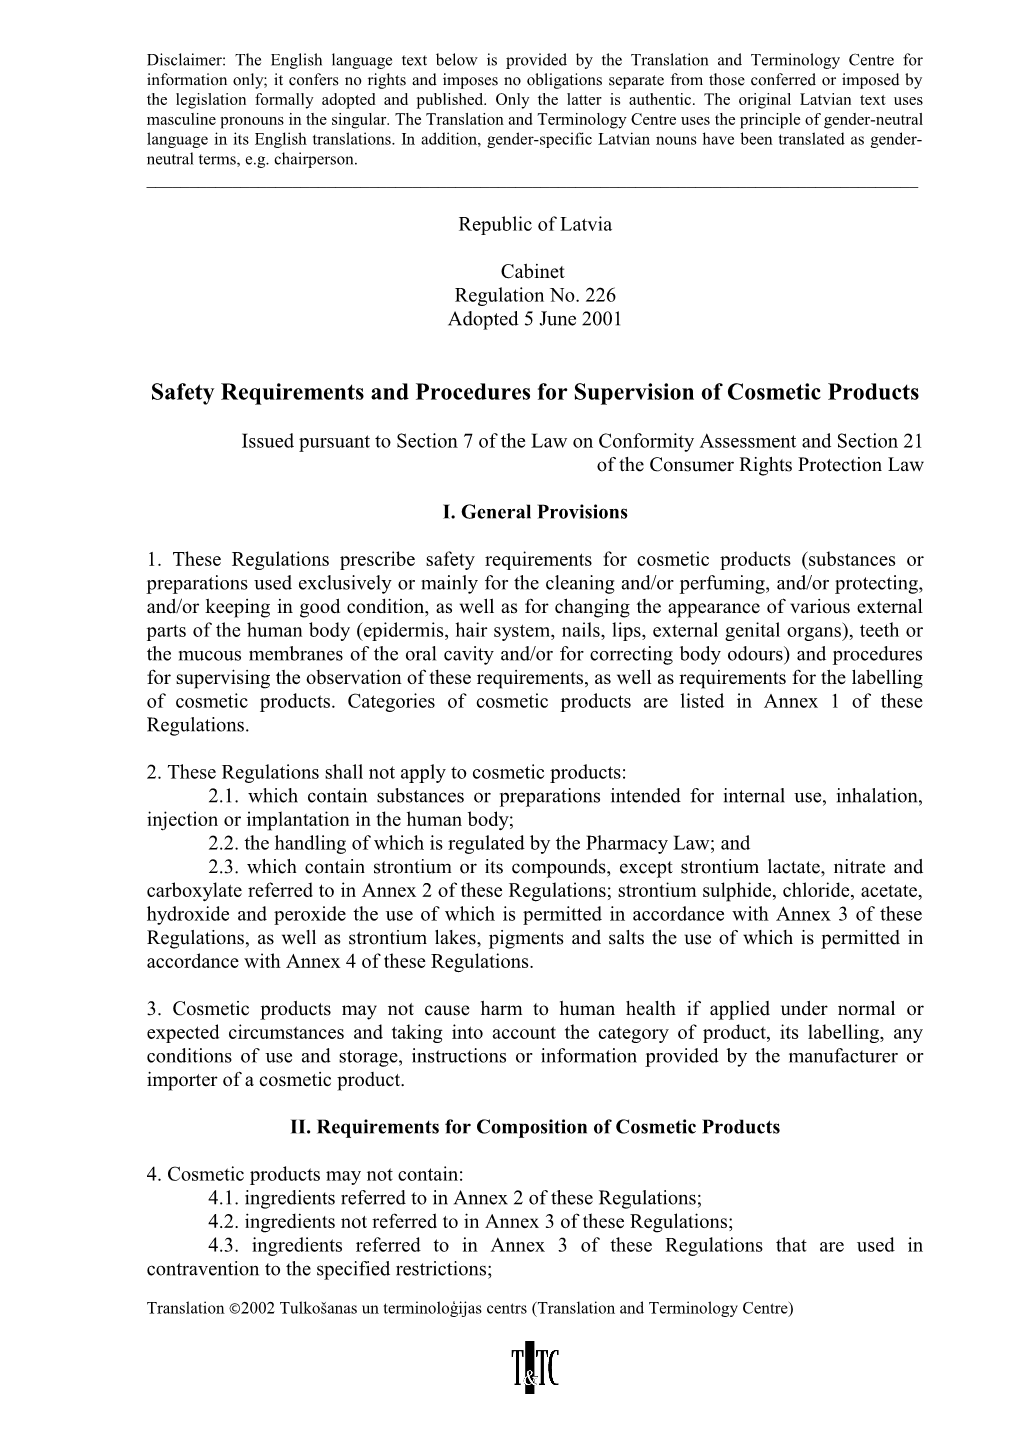 Safety Requirements and Procedures for Supervision of Cosmetic Products